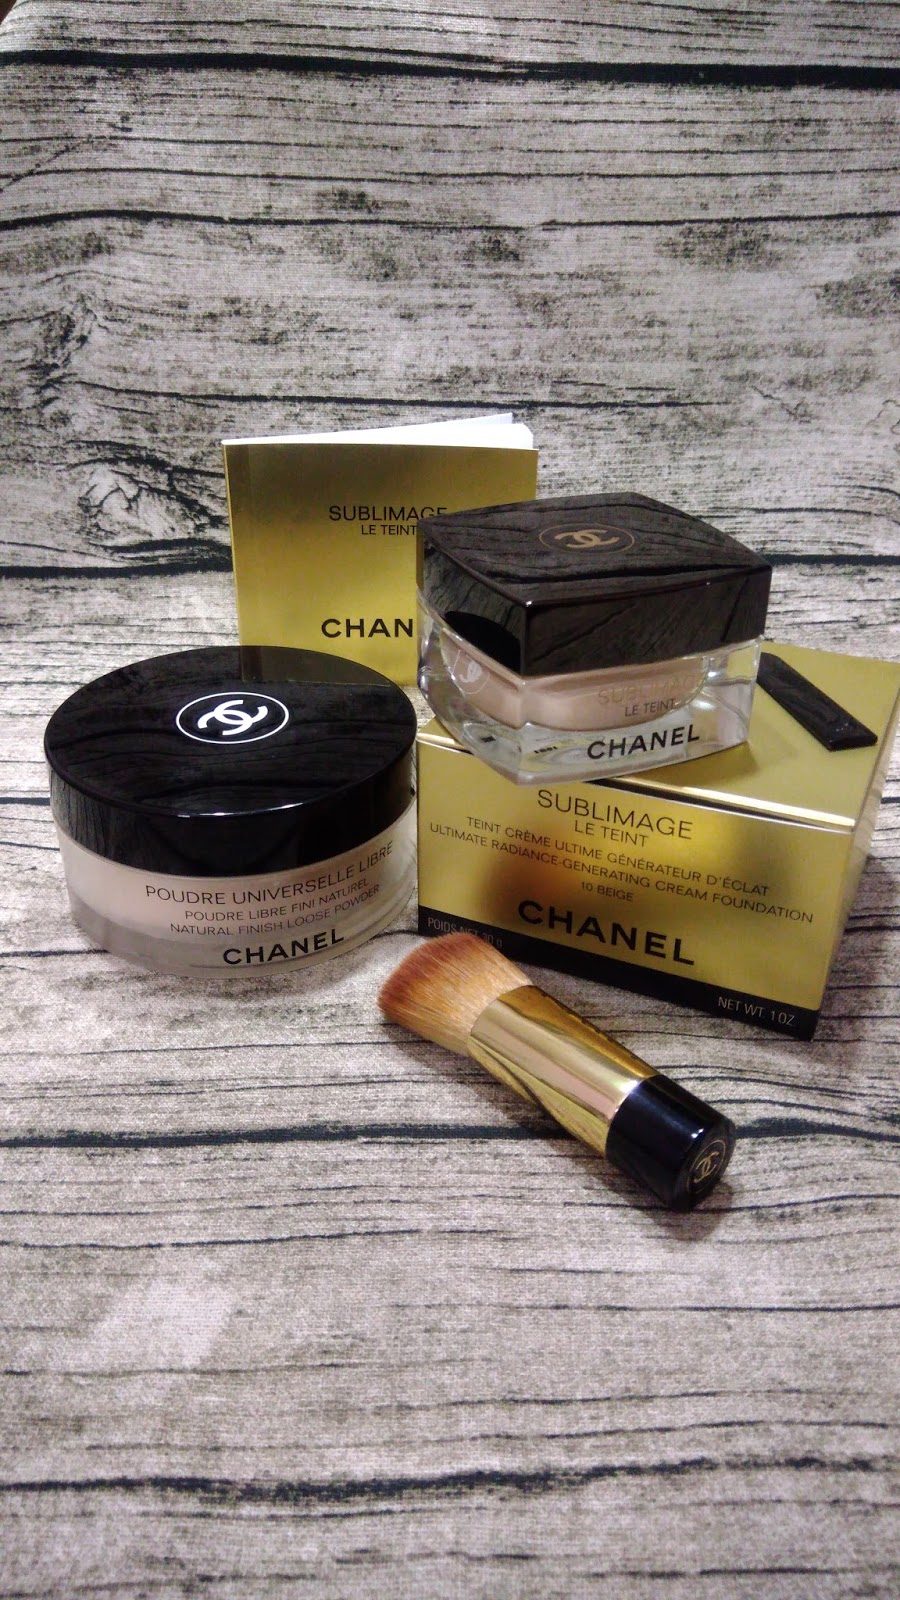 All About That Base: Super Luxurious Chanel Sublimage Le Teint Ultimate  Radiance-Generating Cream Foundation